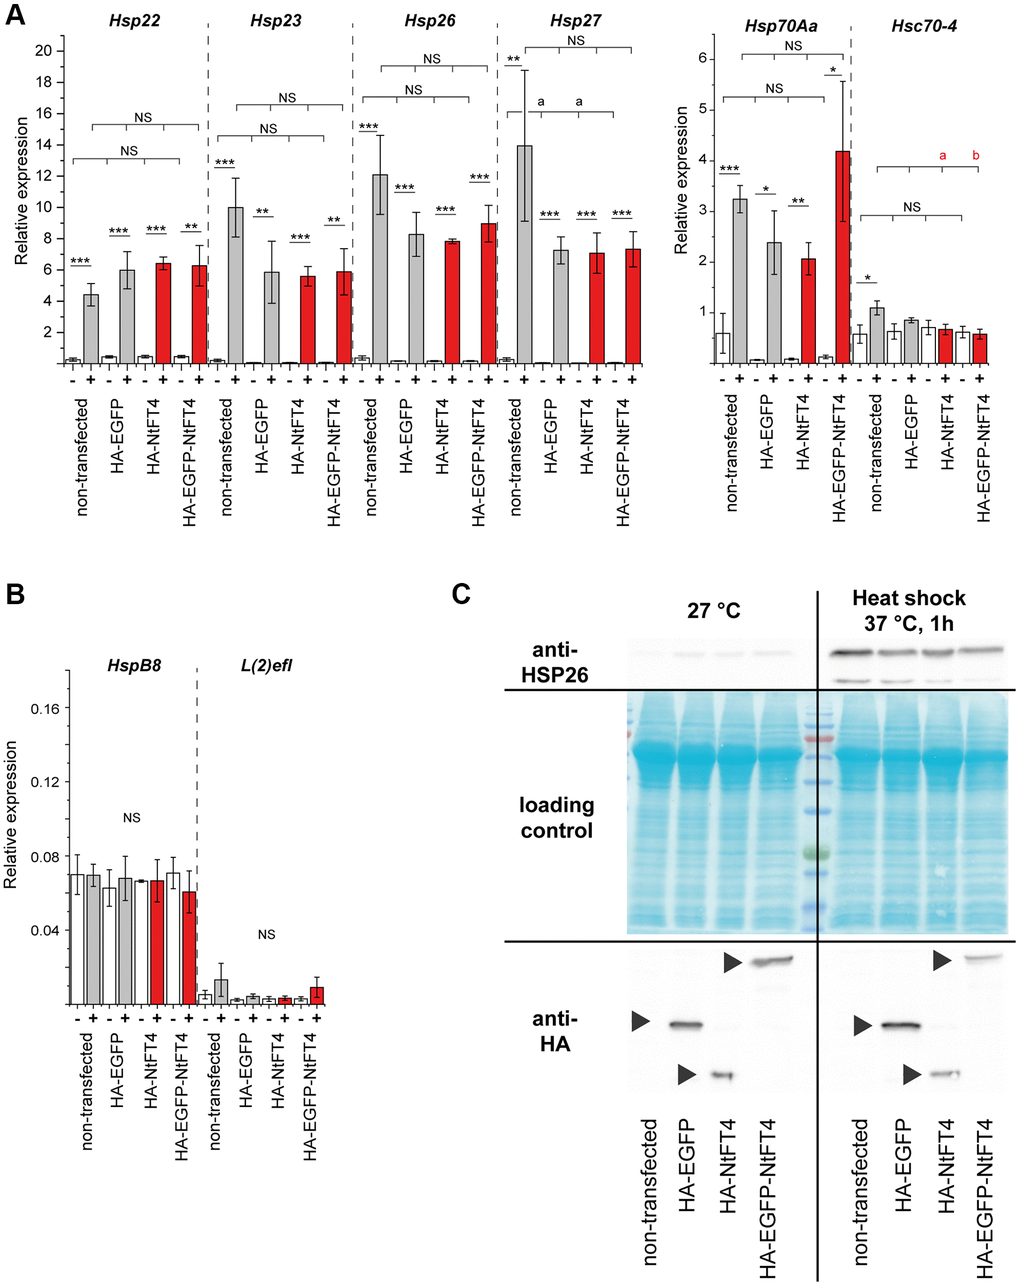 Transfection and heat stress response of heat shock proteins in S2 cells. Expression of stress-responsive (Hsp22, Hsp23, Hsp26, Hsp27, Hsp70Aa and Hsc70–4) (A) and non-responsive (HspB8 and l(2)efl) (B) heat shock protein genes in S2 cells after transient transfection with HA-EGFP, HA-NtFT4 or HA-EGFP-NtFT4 compared to non-transfected cells. After transfection and induction of gene expression, cells were cultivated at 27°C (–, white bars) or stressed by heat shock at 37°C for 1 h (+, gray bars show controls and red bars show NtFT4). Relative gene expression was analyzed by qRT-PCR using Gapdh2 as a reference. Data are means ± SEM (n = 3). Significance was tested by one-way ANOVA and Tukey’s post hoc test for responses to transfection (untransfected vs. HA-EGFP vs. HA-NtFT4 vs. HA-EGFP-NtFT4; a = significant compared to nontransfected cells, p b = significant compared to nontransfected cells, p NS: not significant including all remaining comparisons) and using a t-test for pairwise comparisons of individual responses to heat shock (****p ***p **p *p NS: not significant). (C) Immunodetection of HSP26 following the transient transfection of S2 cells with HA-EGFP, HA-NtFT4 or HA-EGFP-NtFT4 compared with nontransfected cells. The response of HSP26 to transfection and to heat shock at 37°C was analyzed 1 h after treatment by extracting proteins for immunodetection using anti-HSP26 antibodies (top right). The transient expression of HA-EGFP, HA-NtFT4 or HA-EGFP-NtFT4 was confirmed using anti-HA antibodies (bottom, arrowheads). All p-values are provided in Supplementary Table 9.